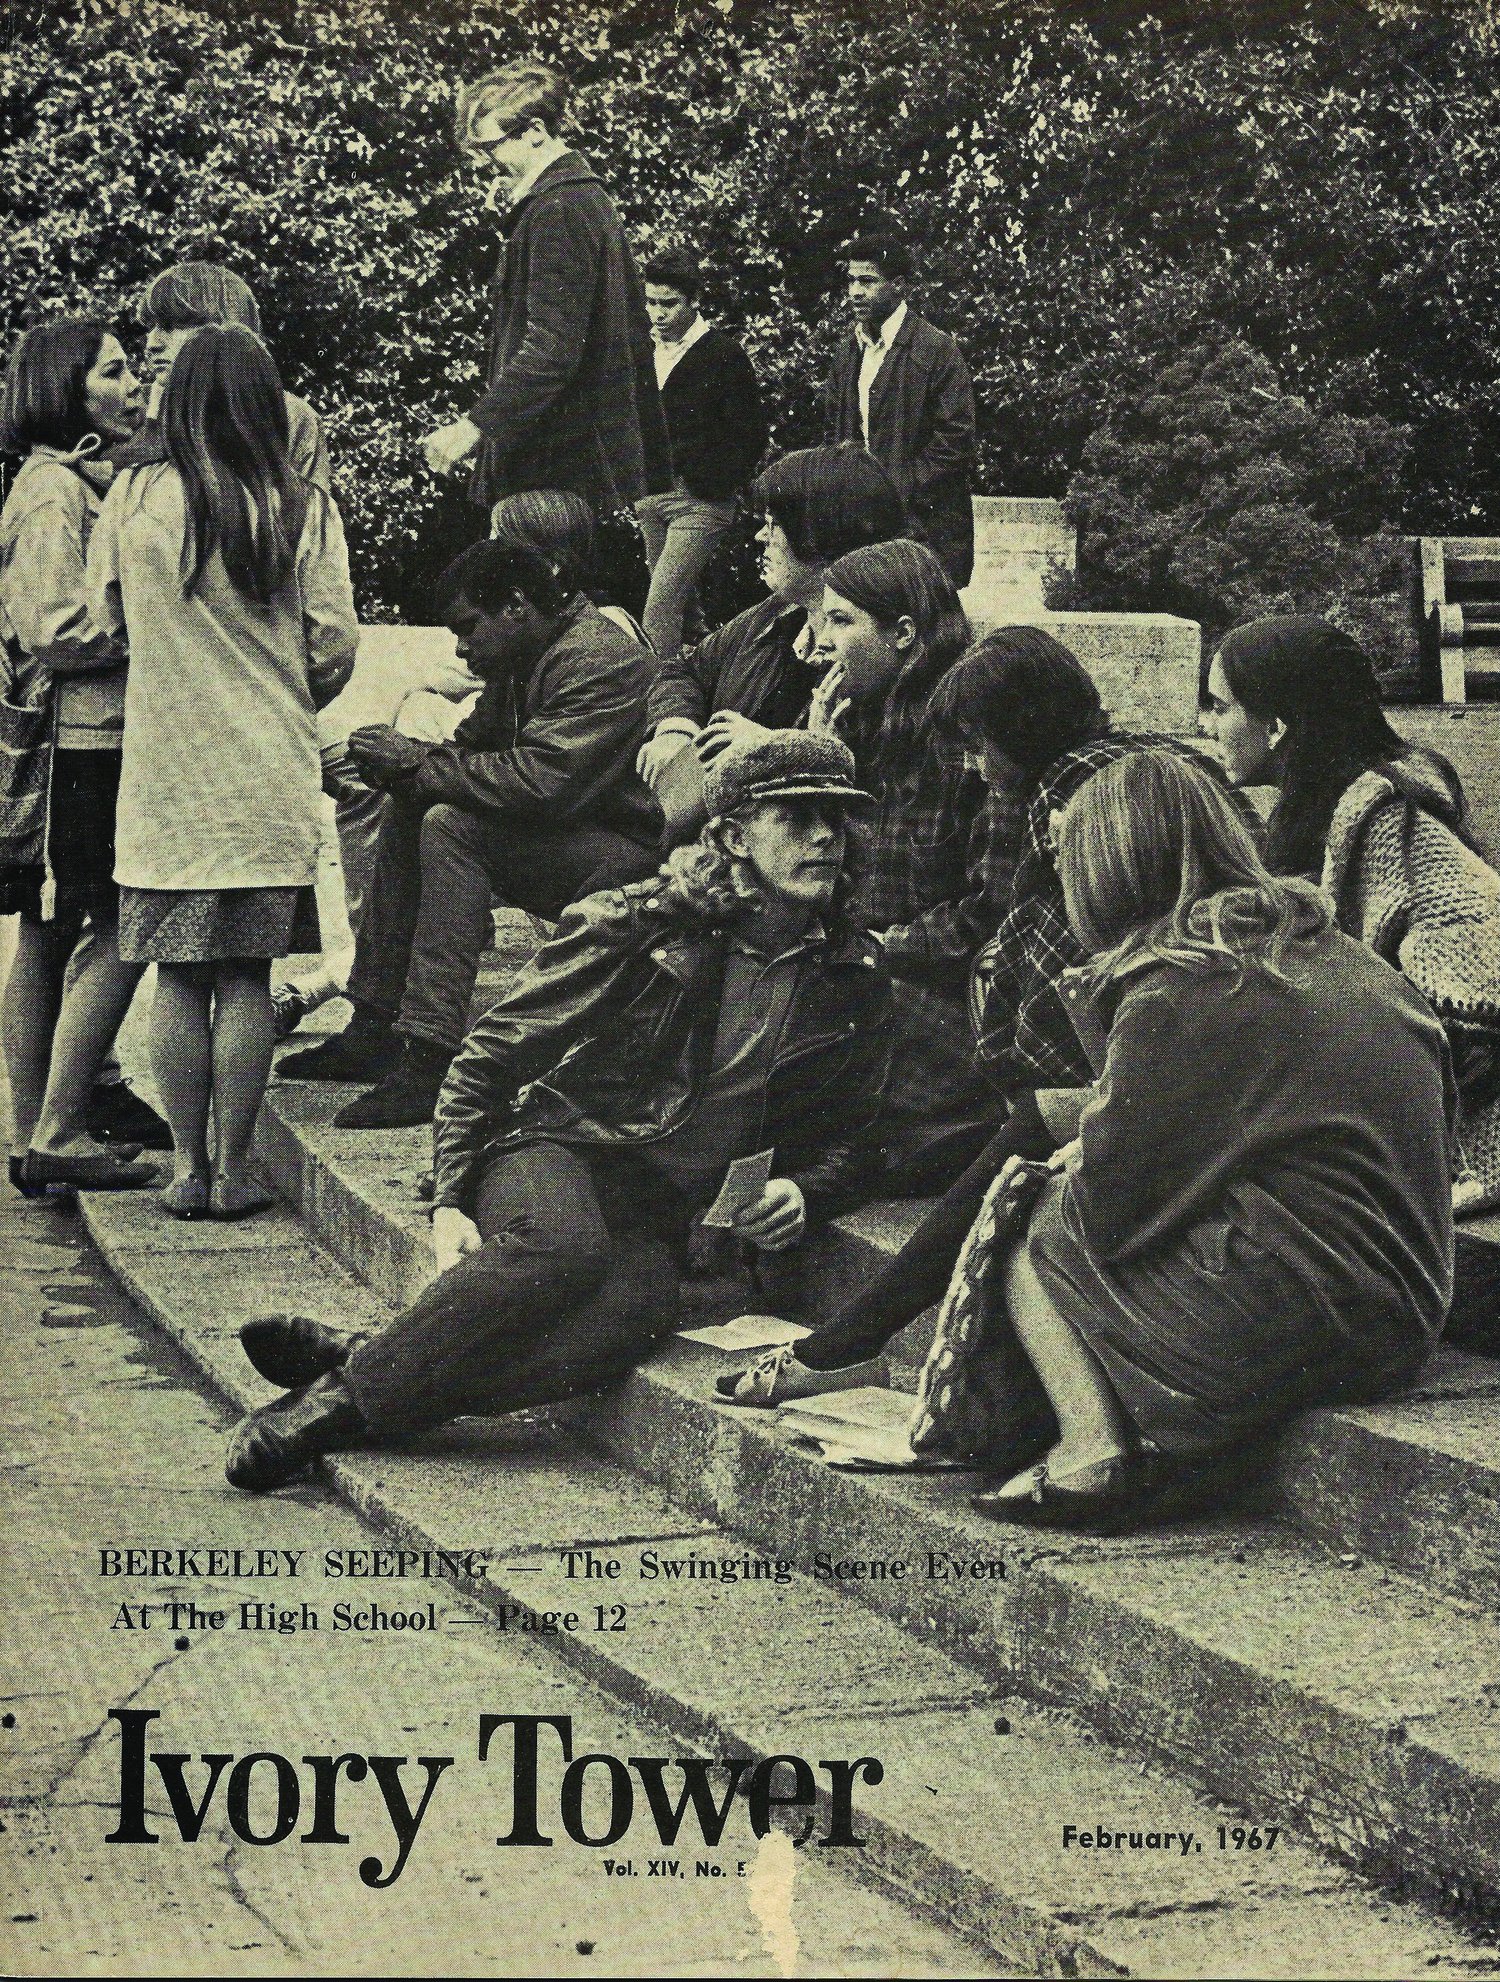 Photo of students sitting on steps circa 1967